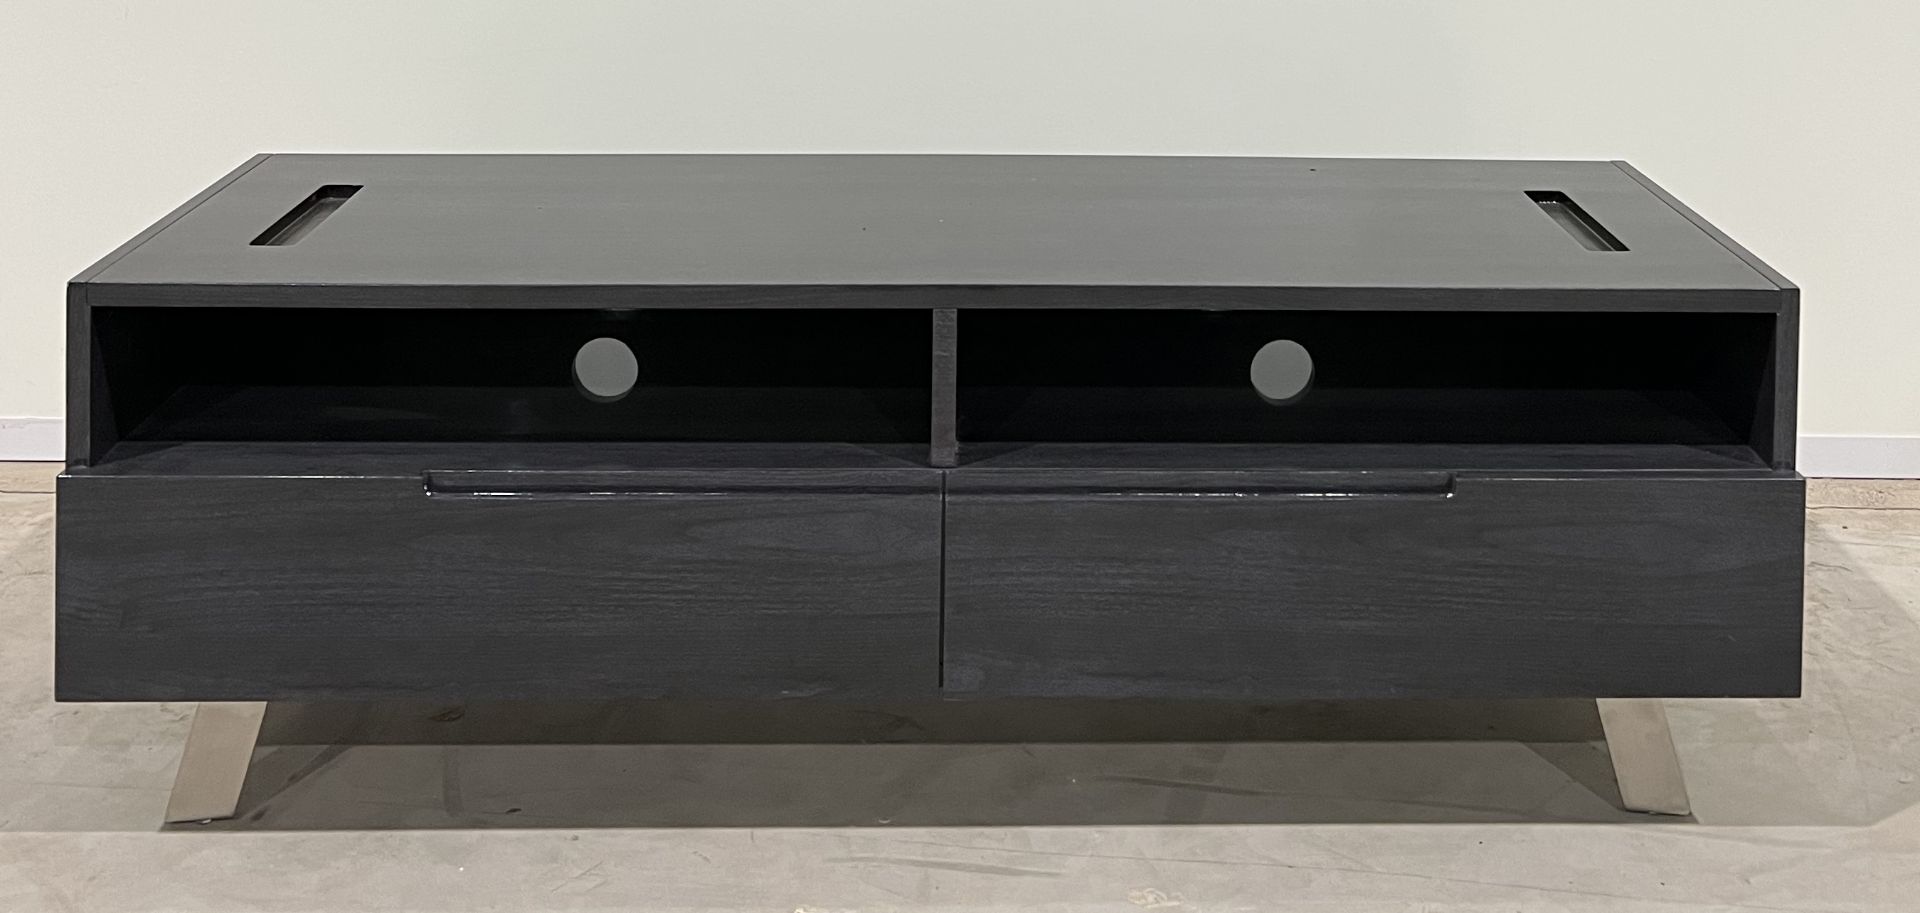 Contemporary Media Unit Lacquered Finish It Makes A Statement In The Home Without Being Overwhelming - Image 2 of 3